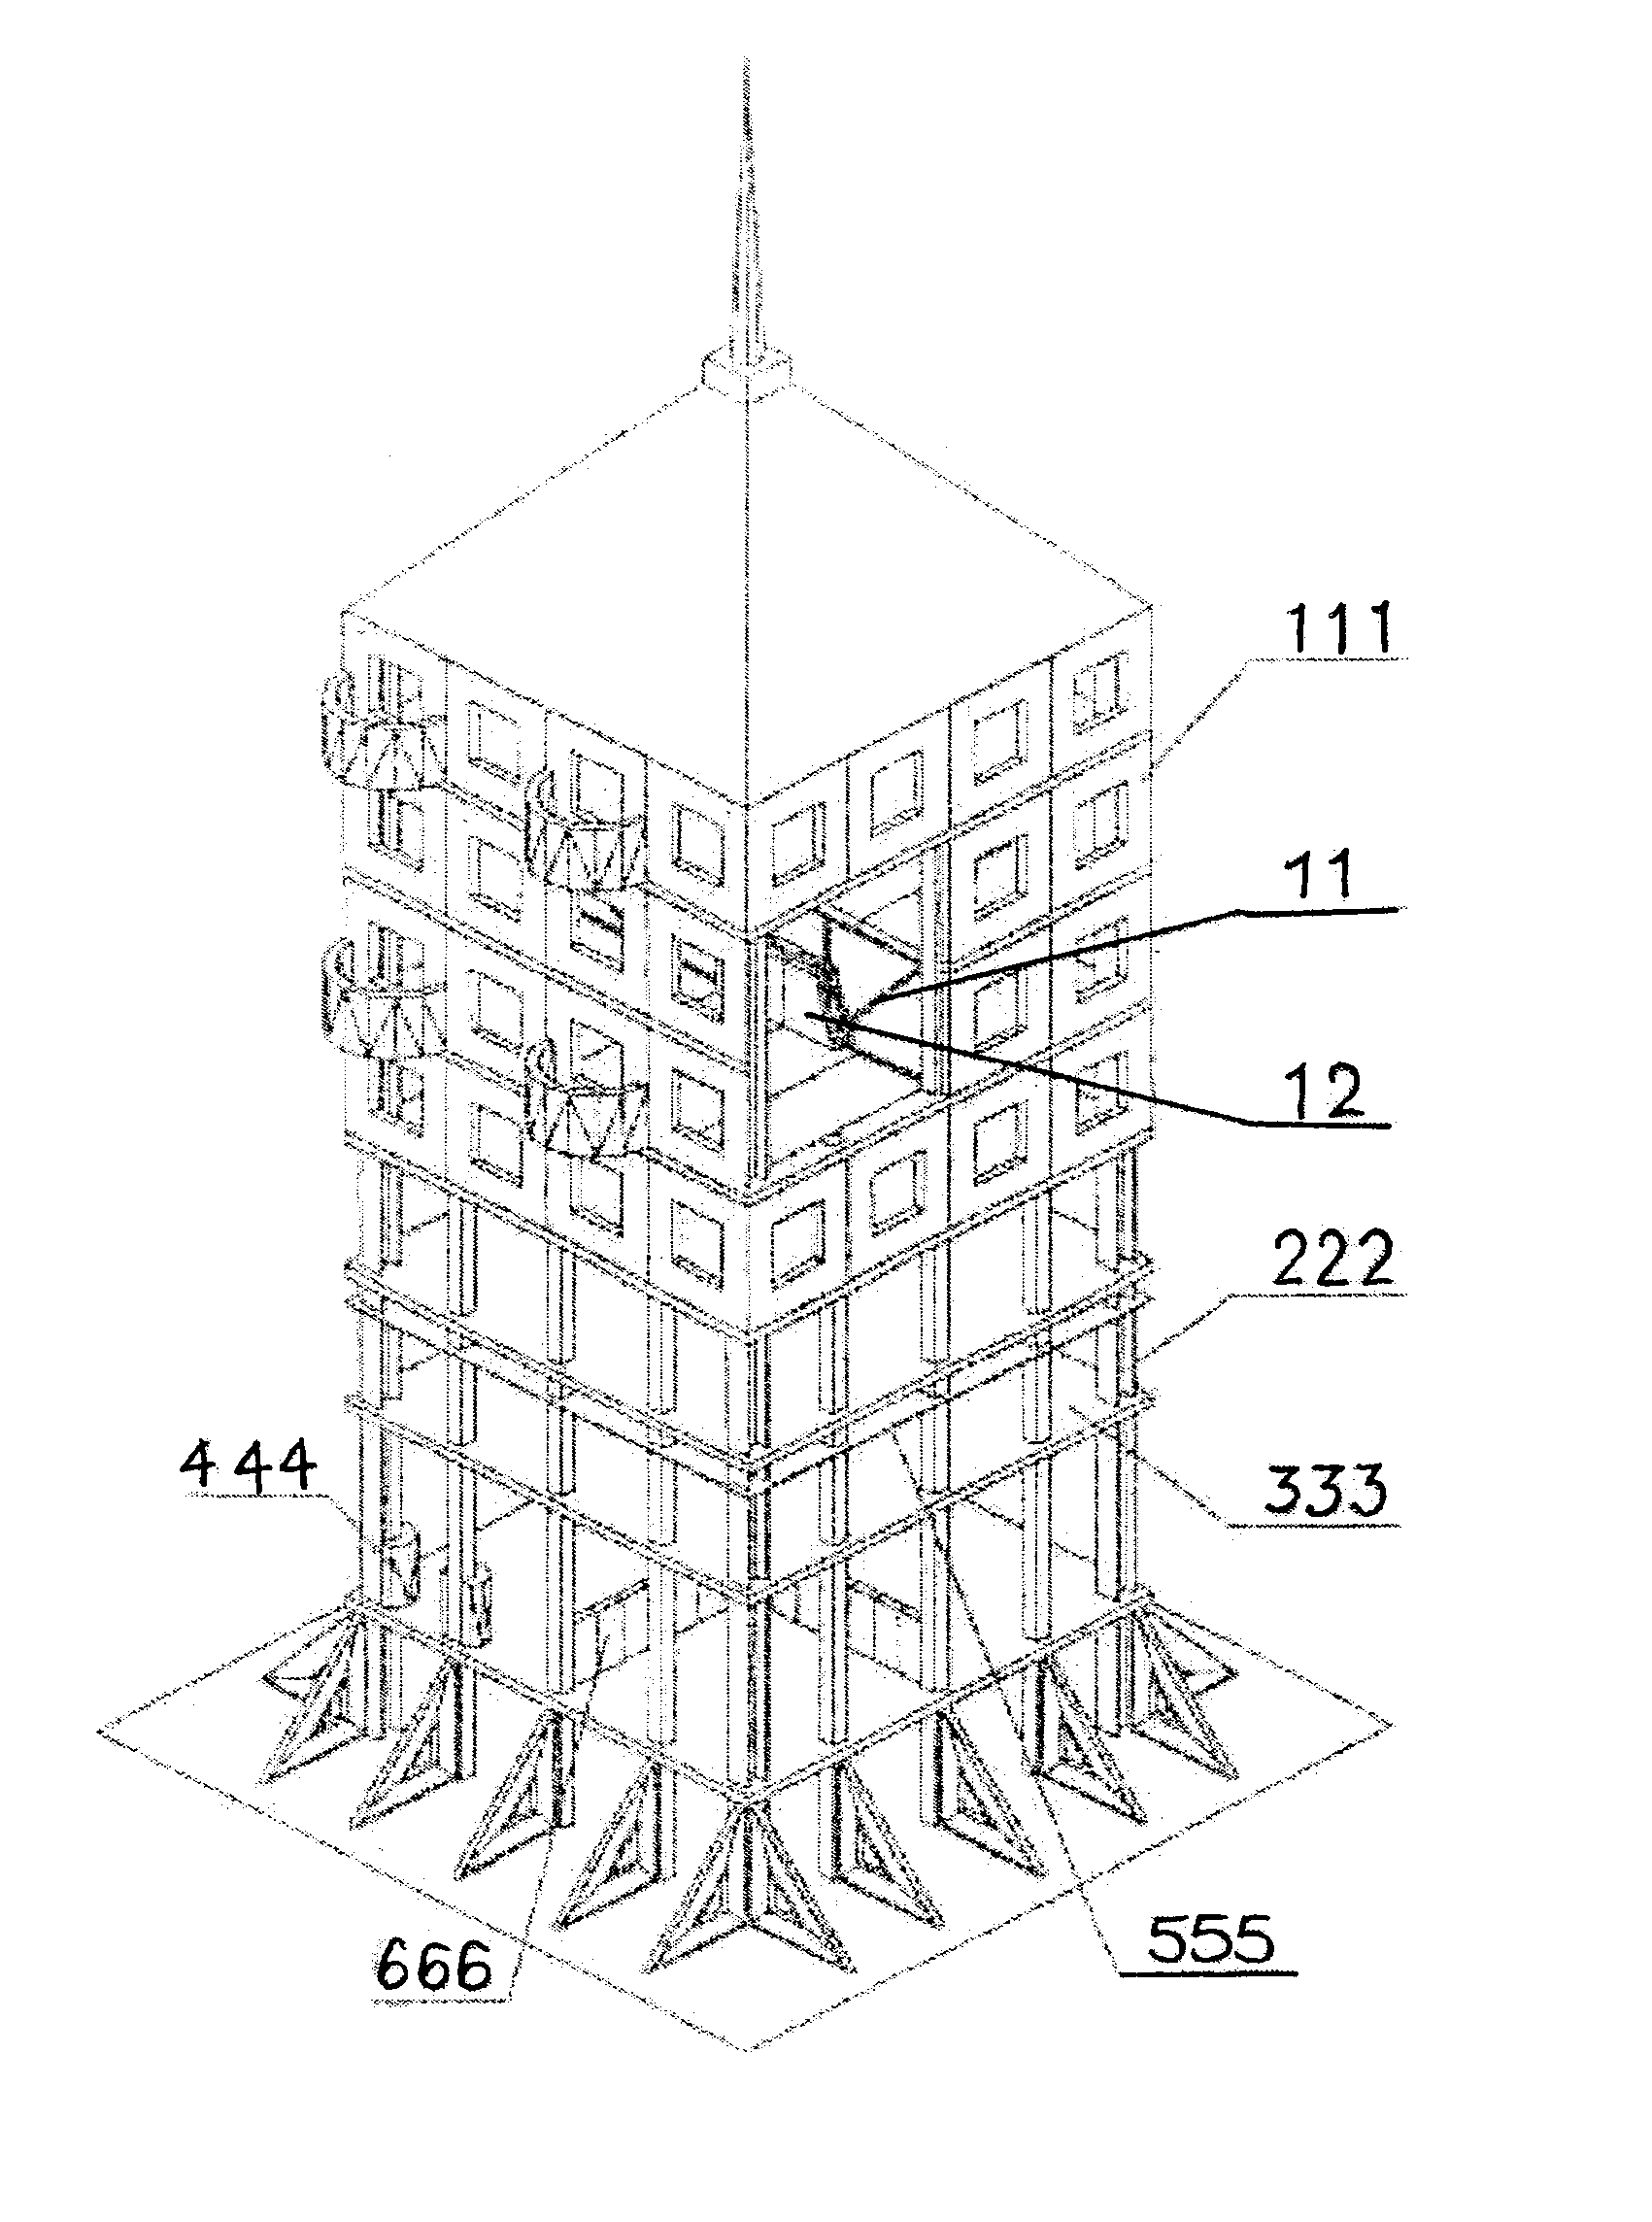 Structure formed of foaming cement and lightweight steel, and a structure system and method of forming the structure system